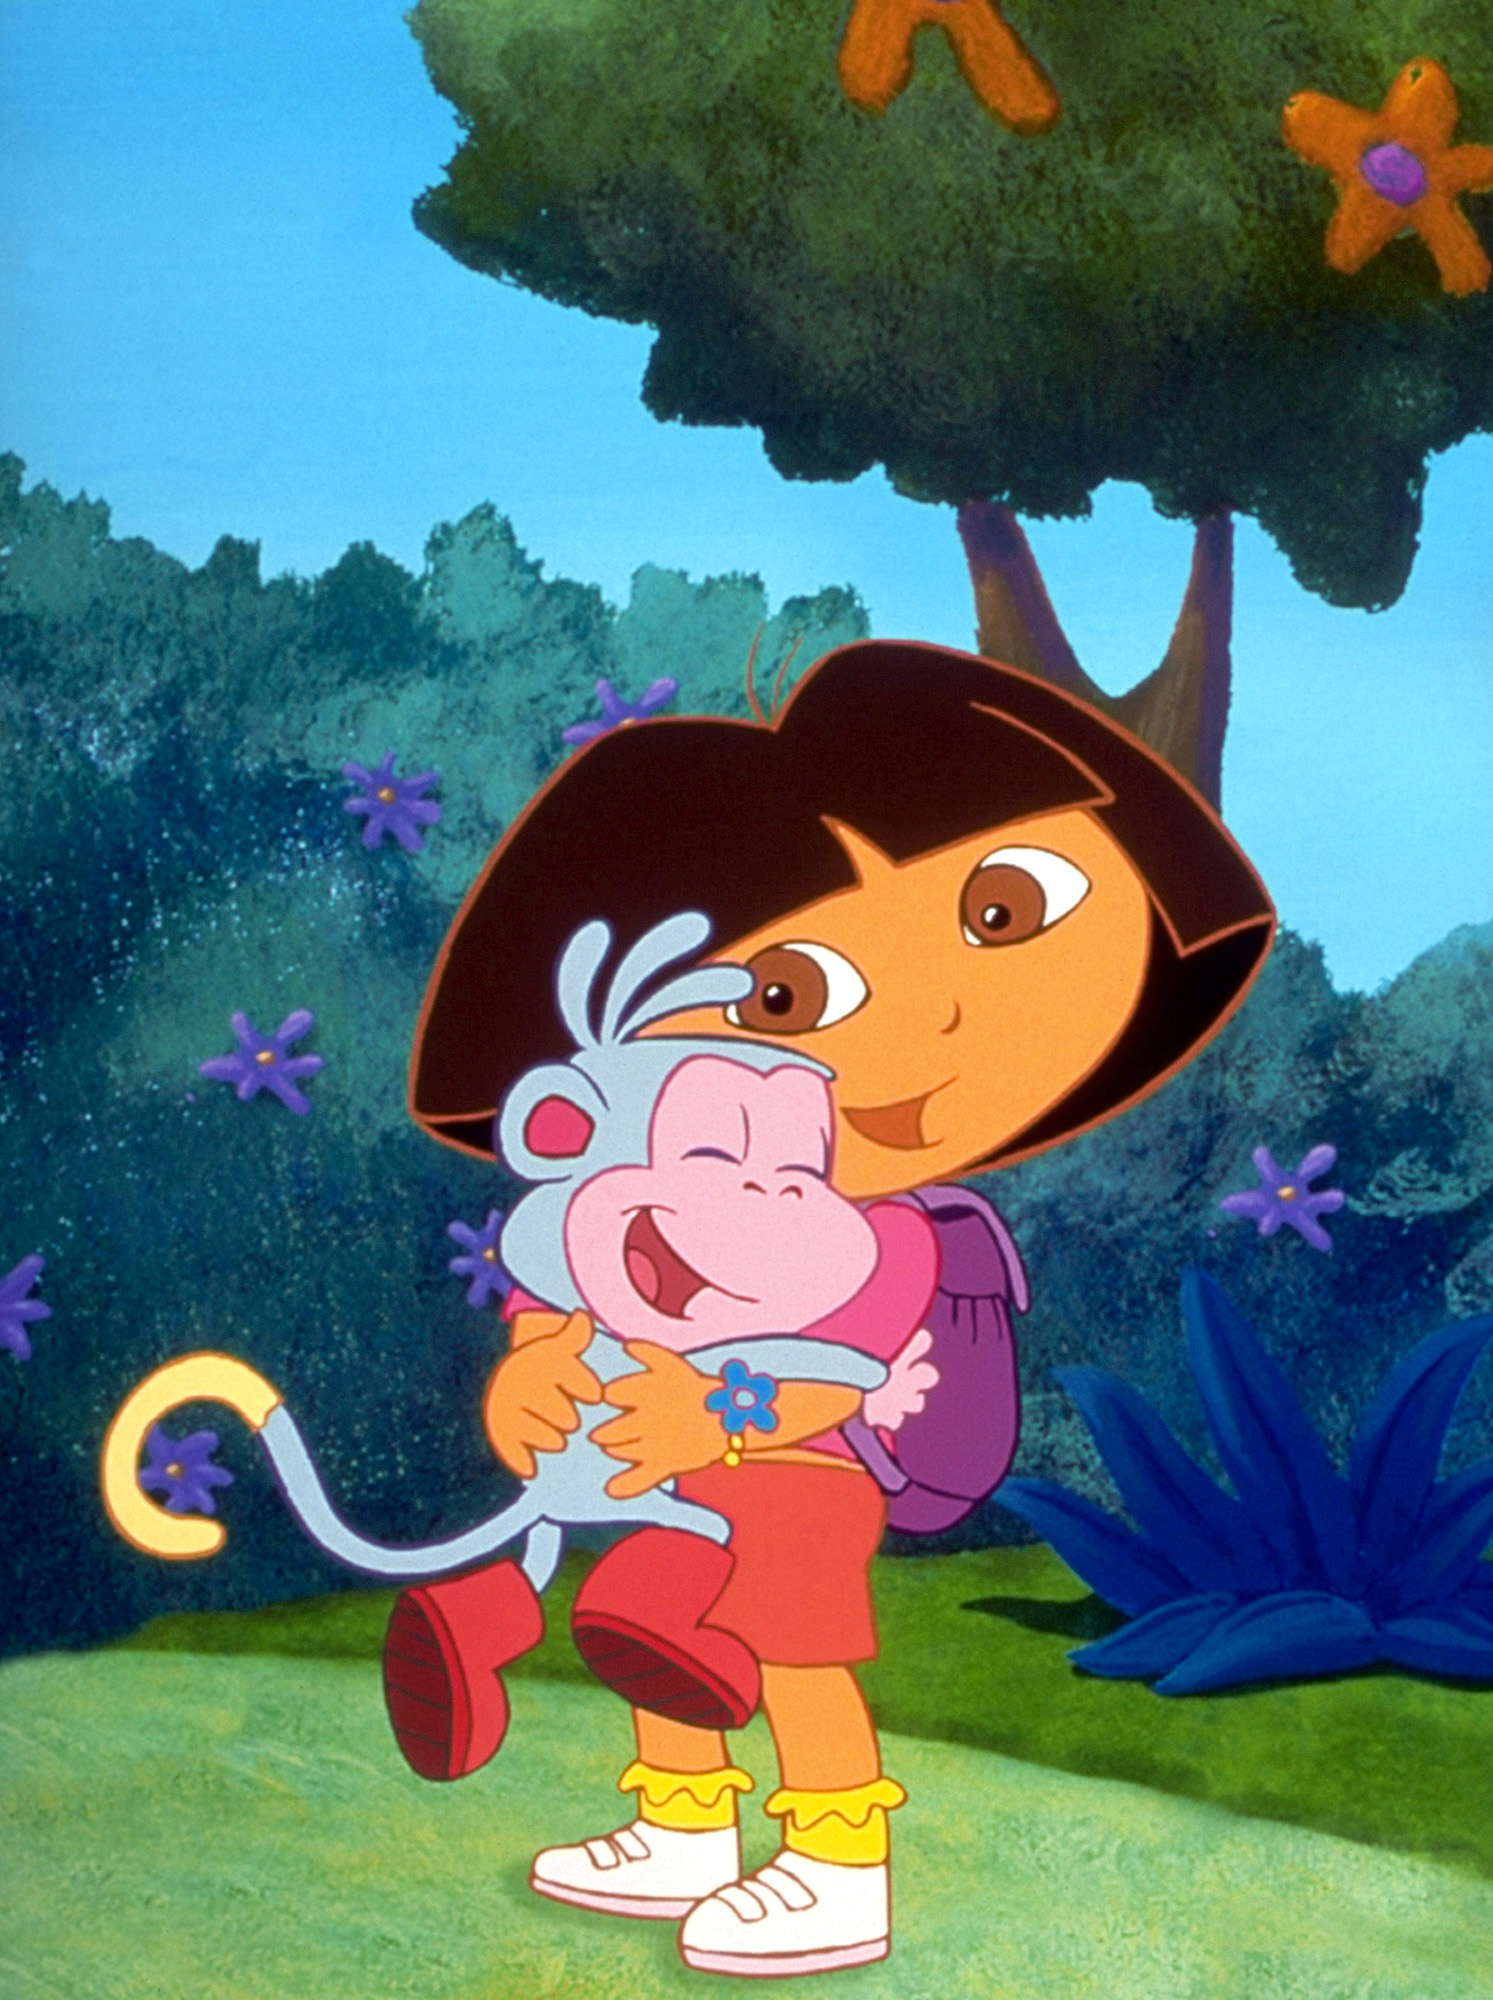 Dora the Explorer holding Boots the Monkey in a forest setting